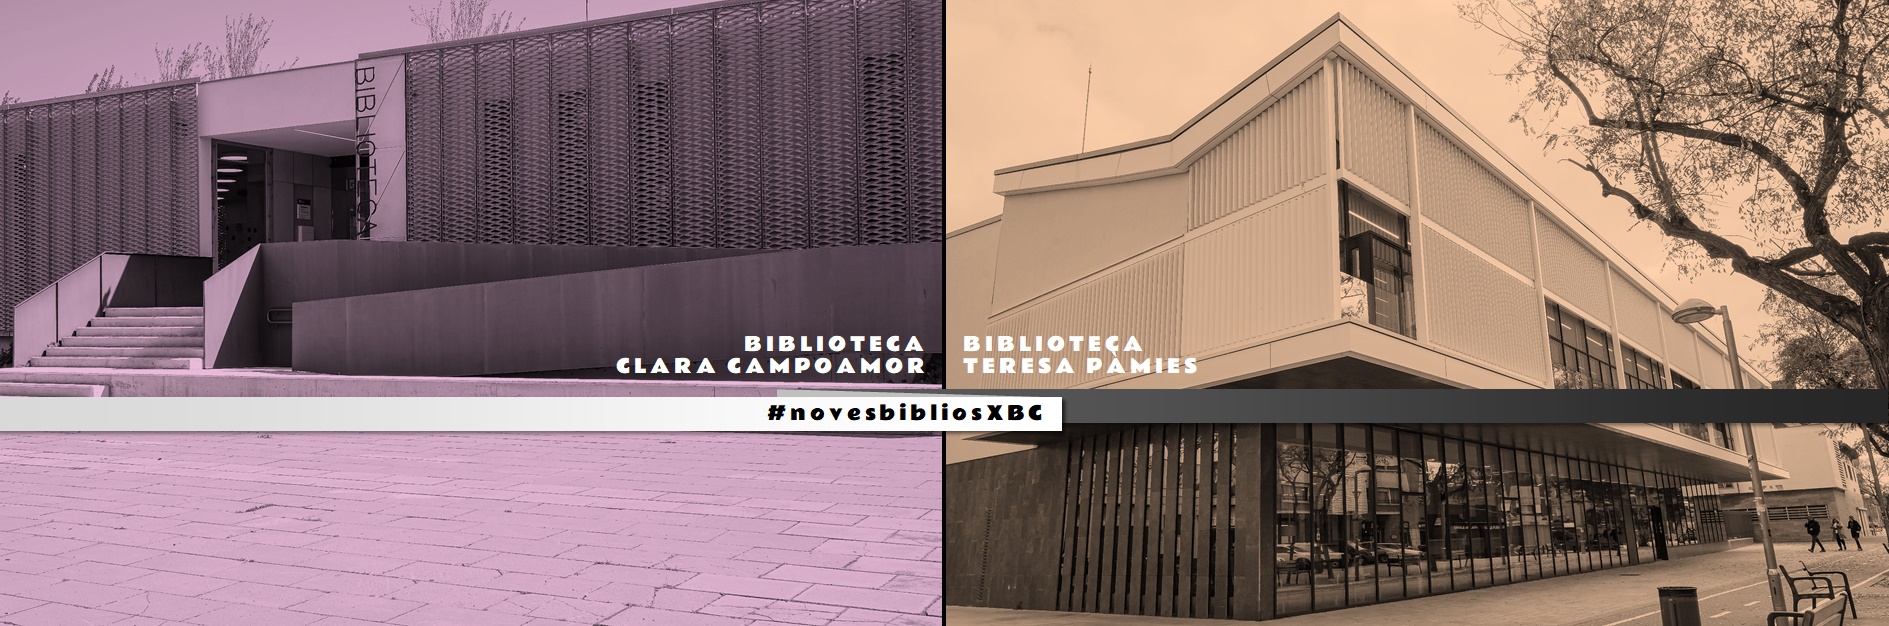 Noves biblioteques